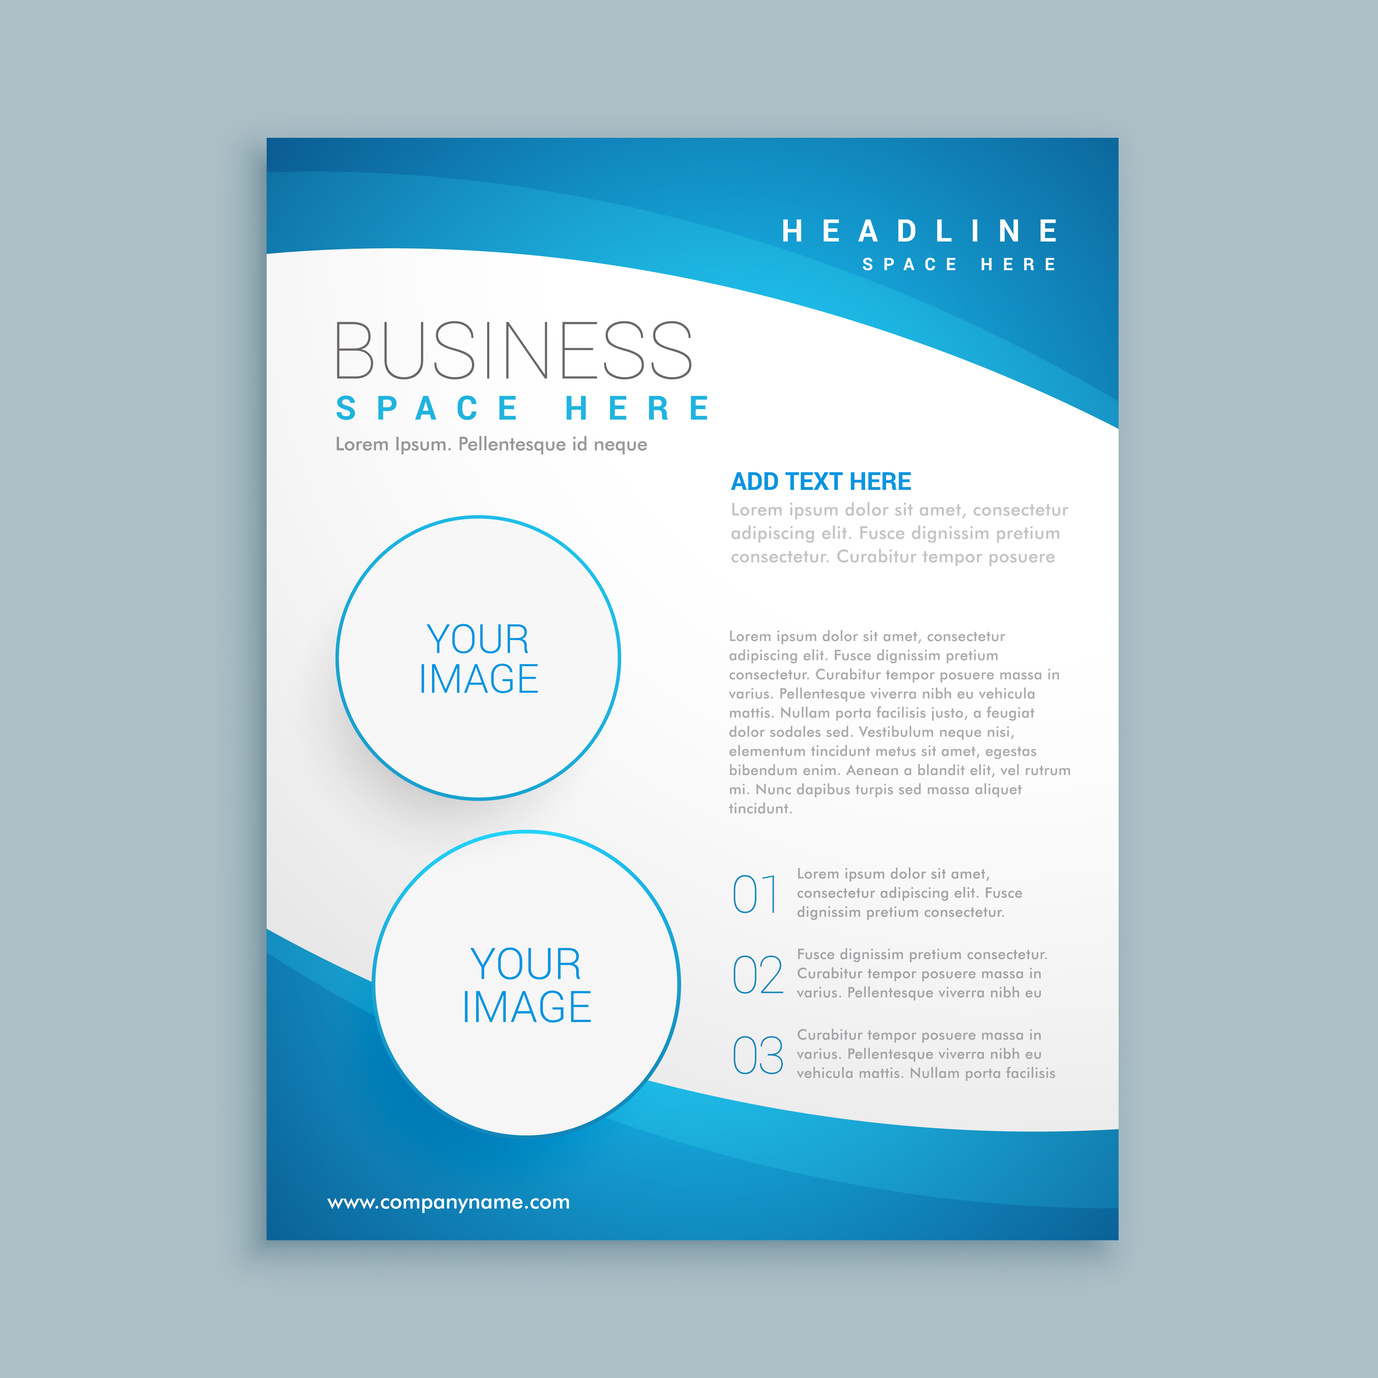 How to Design a Business Analyst Company Brochure - psdlearning.com